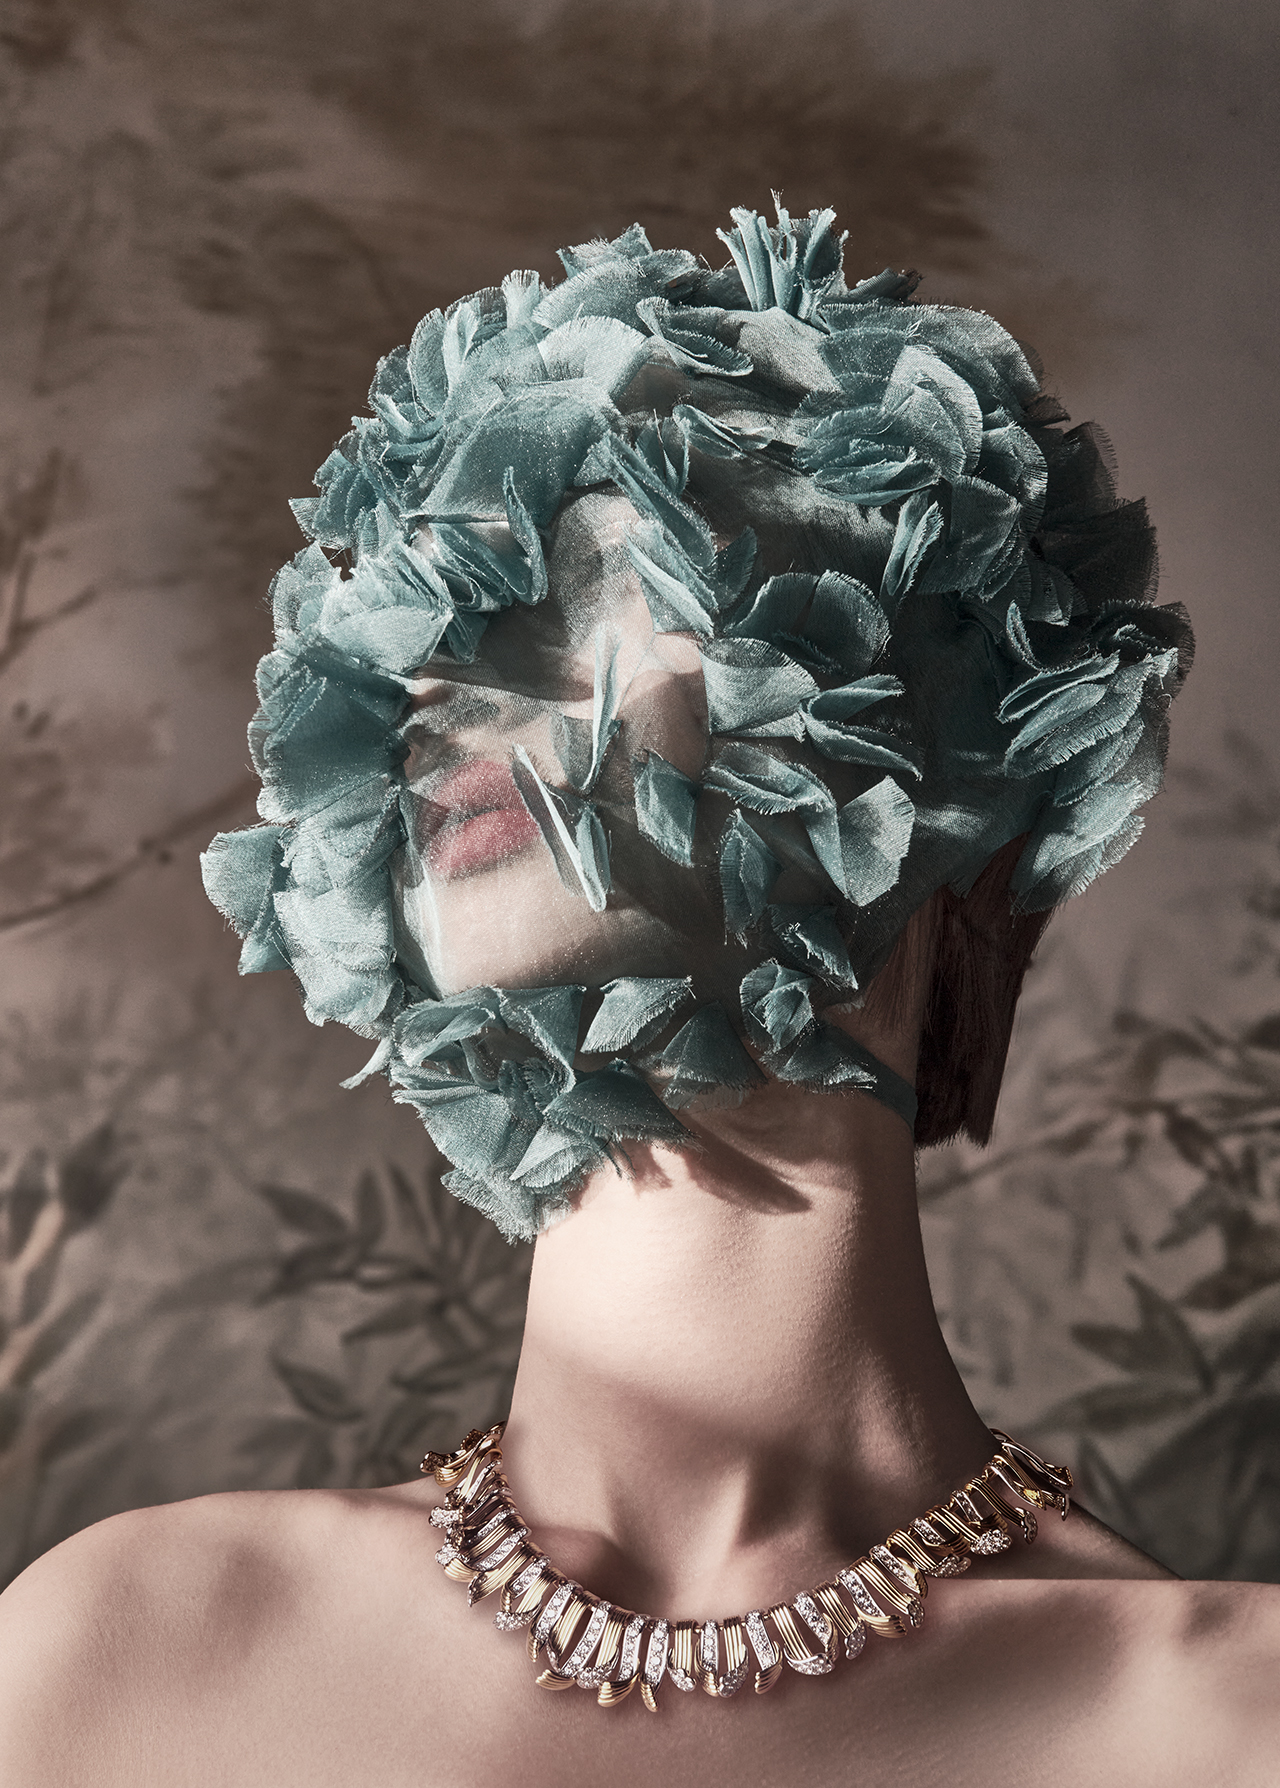 Tiffany & Co.'s BOTANICA Floral High jewellery Collection